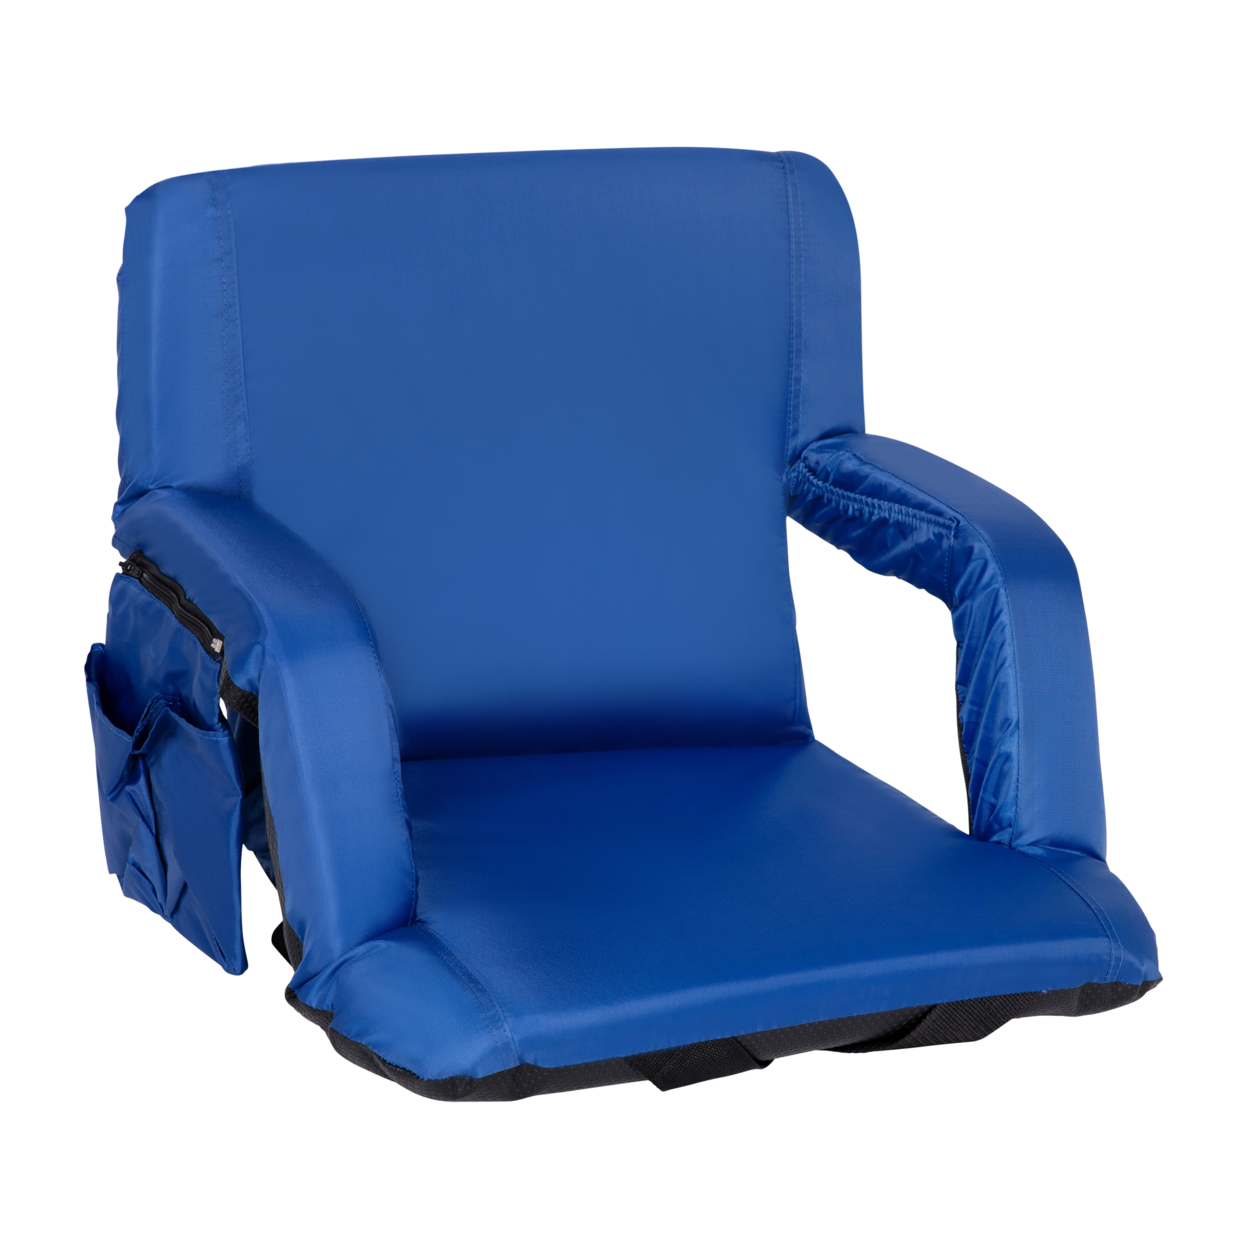 Blue Portable Lightweight Reclining Stadium Chair With Armrests, Padded Back & Seat With Dual Storage Pockets And Backpack Straps